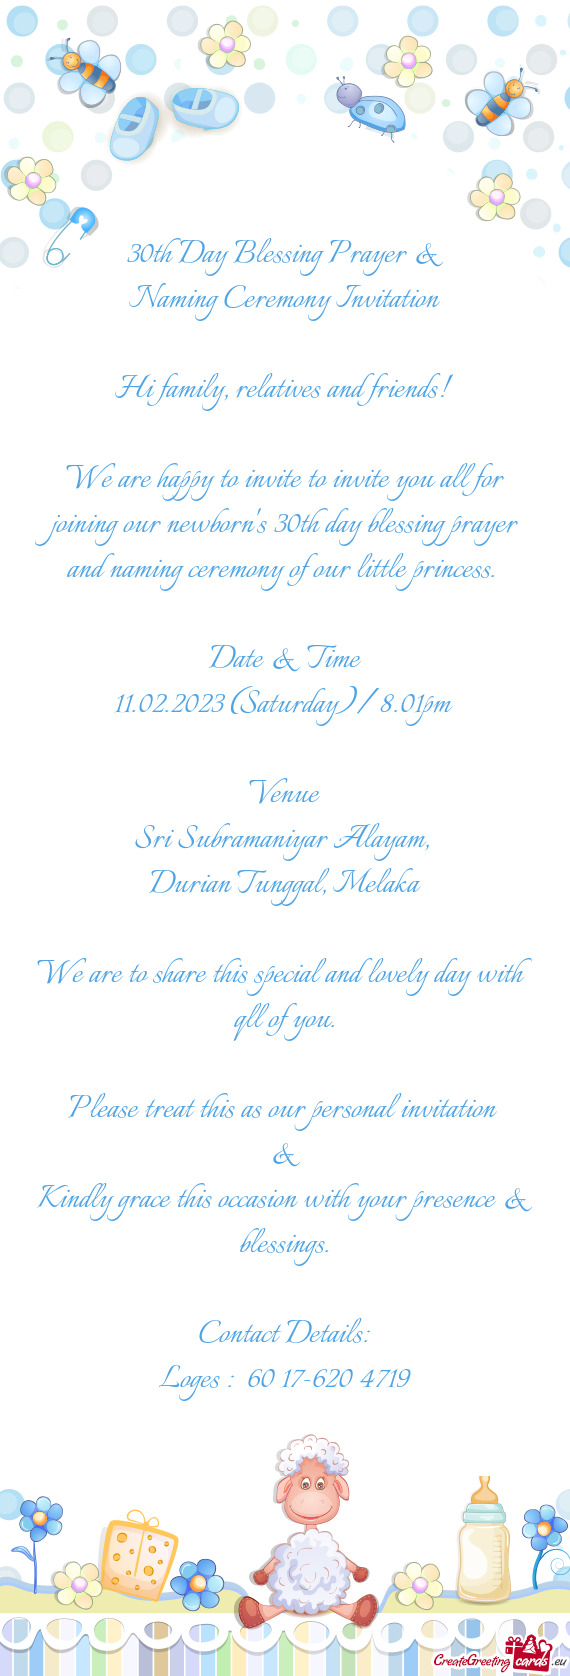 We are happy to invite to invite you all for joining our newborn